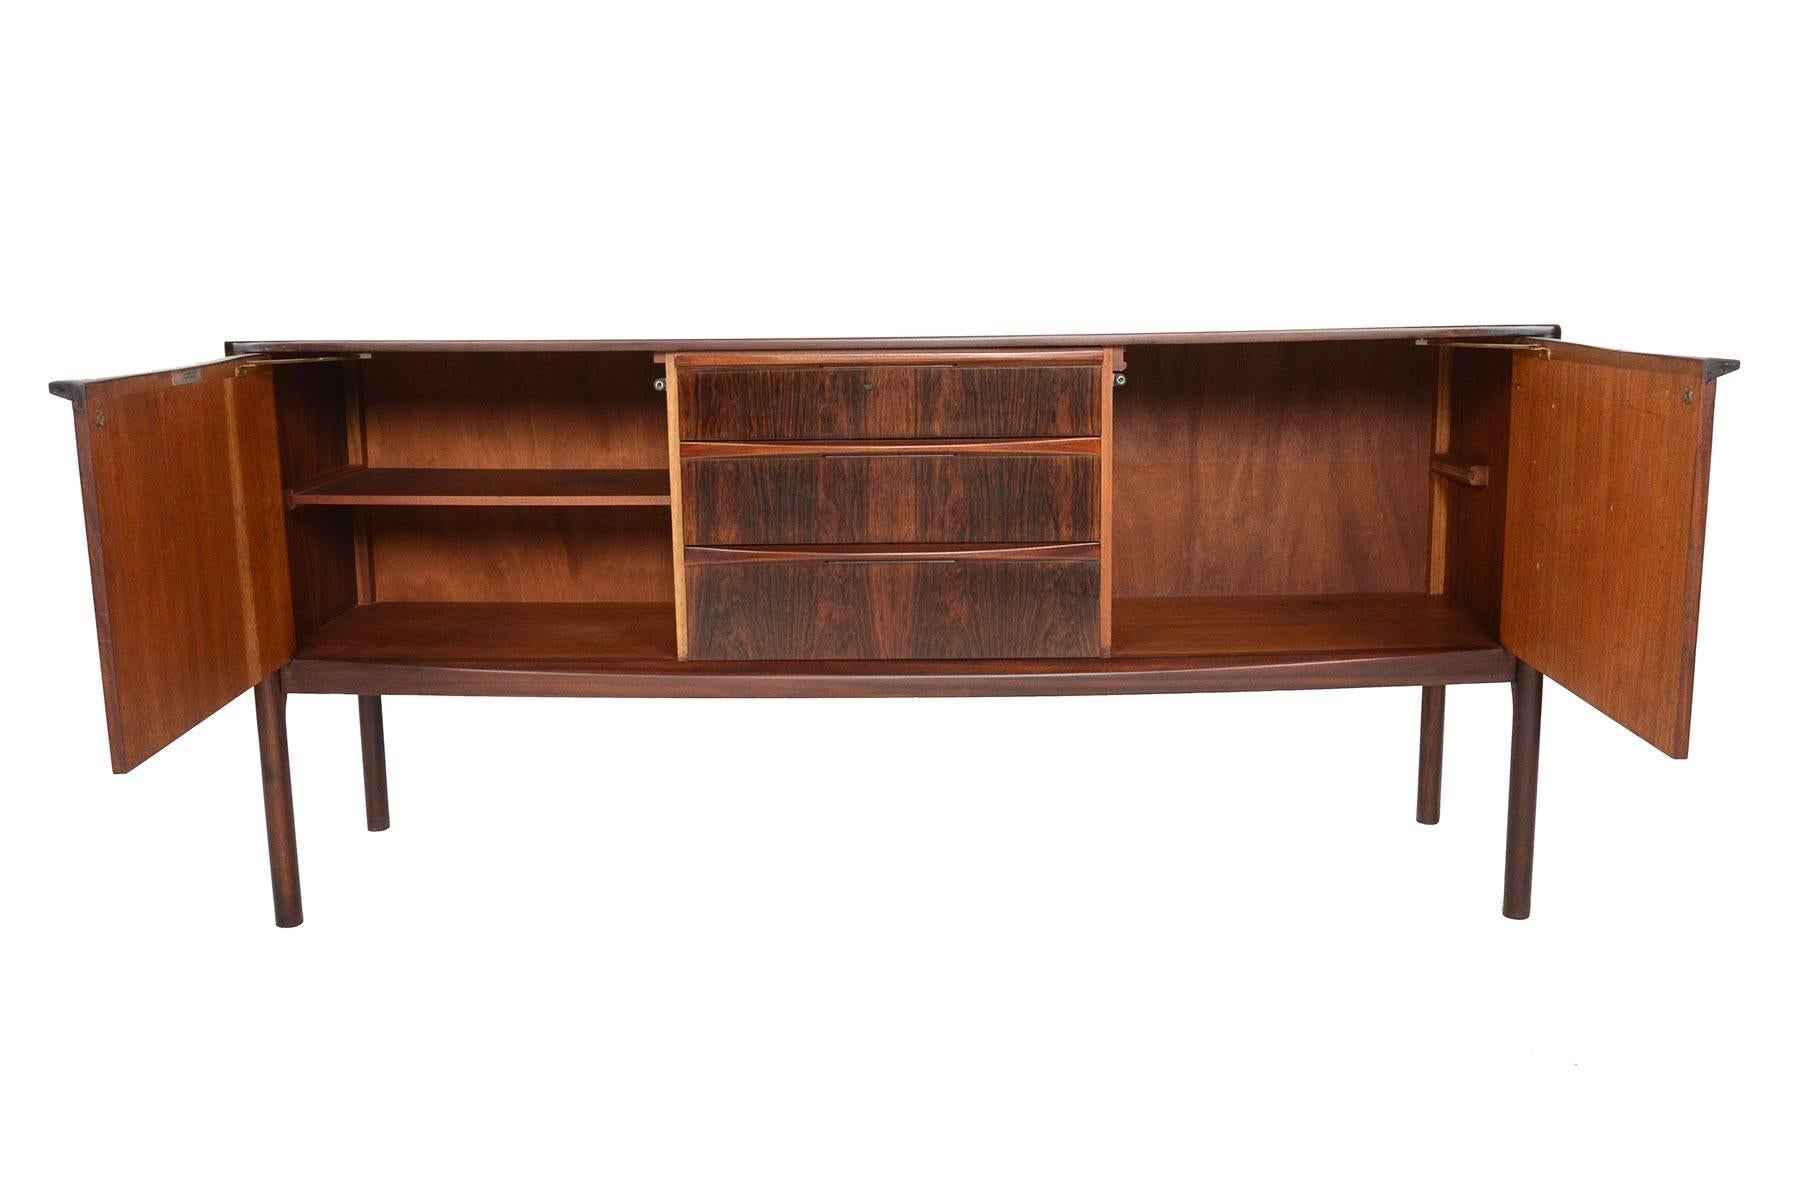 This large, low line credenza was manufactured by A.H. McIntosh in the 1960s and is perfectly suited for any modern home. Cased in gorgeous Brazilian rosewood, this piece is accented by carved mahogany drawer pulls and bowed base. Left and right